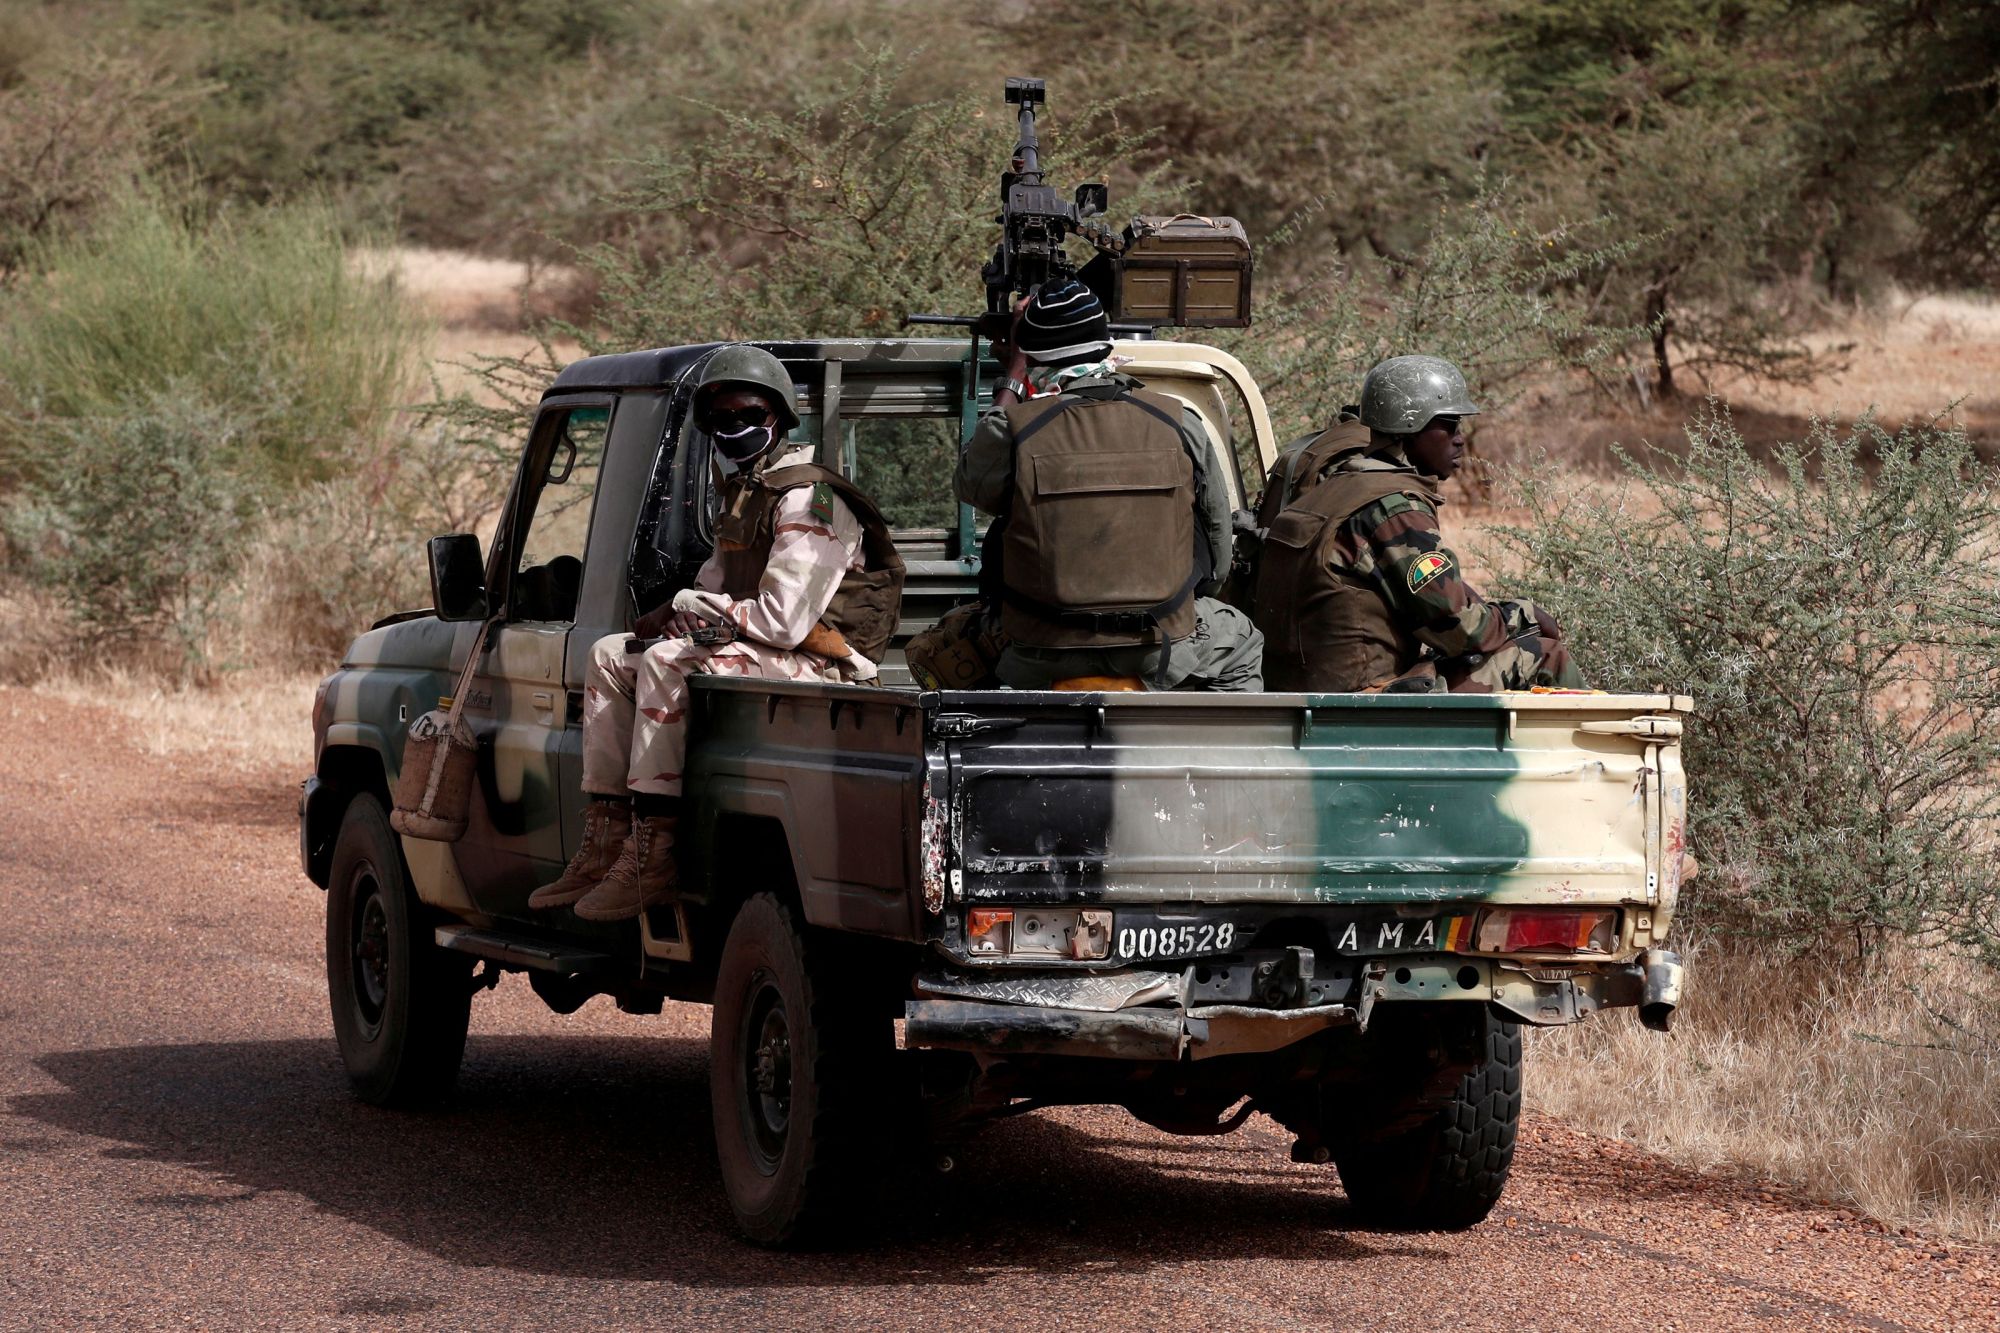 Mali’s army says 203 killed in military operation in Sahel